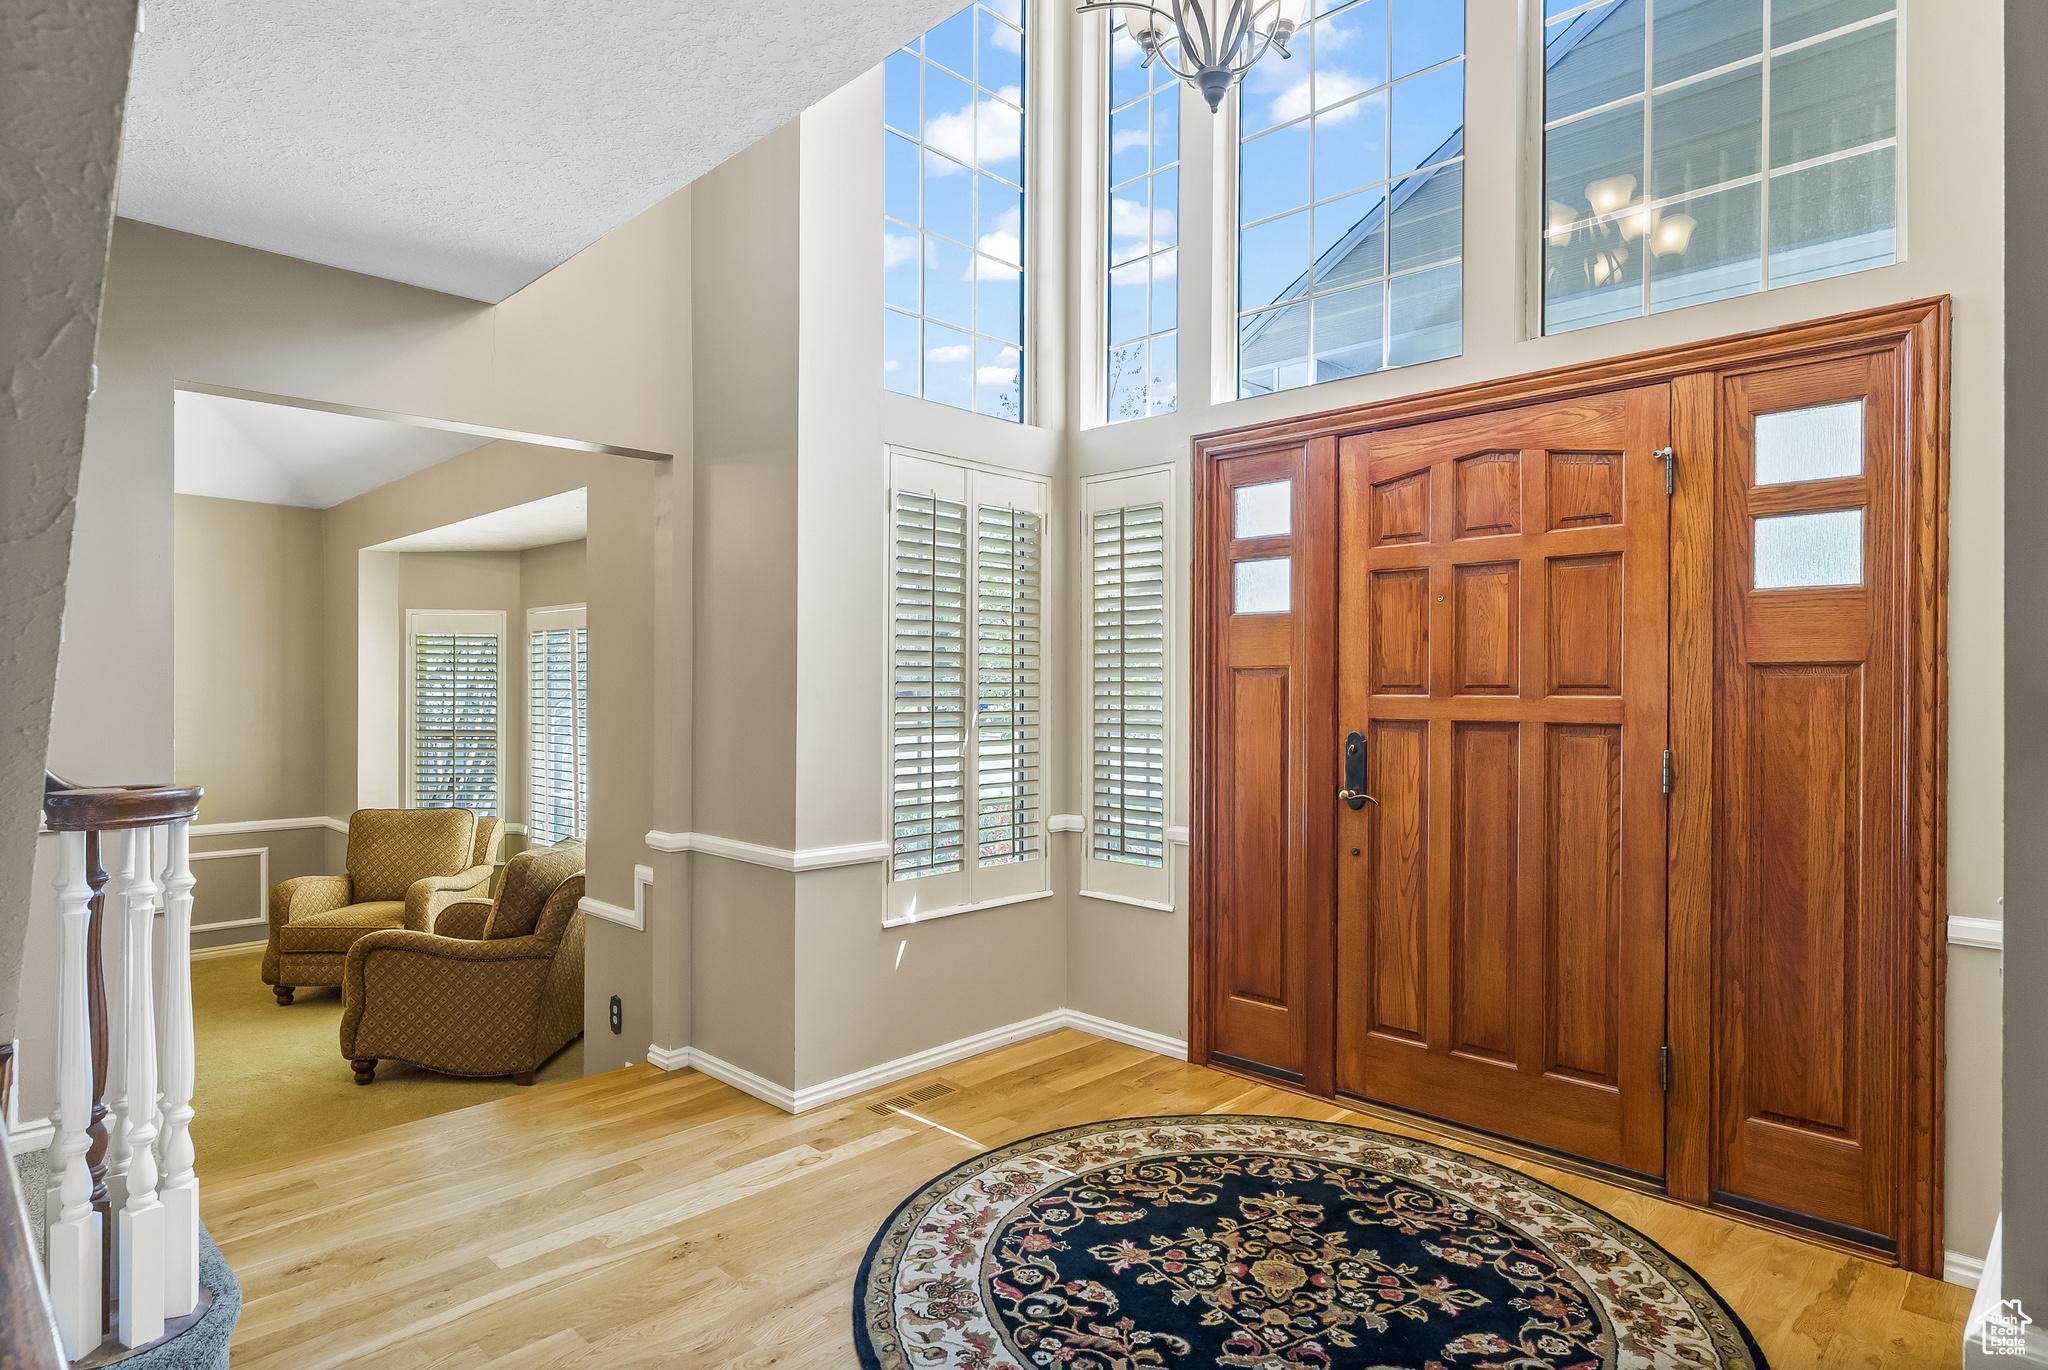 Large entry with hardwood flooring and solid wood door.